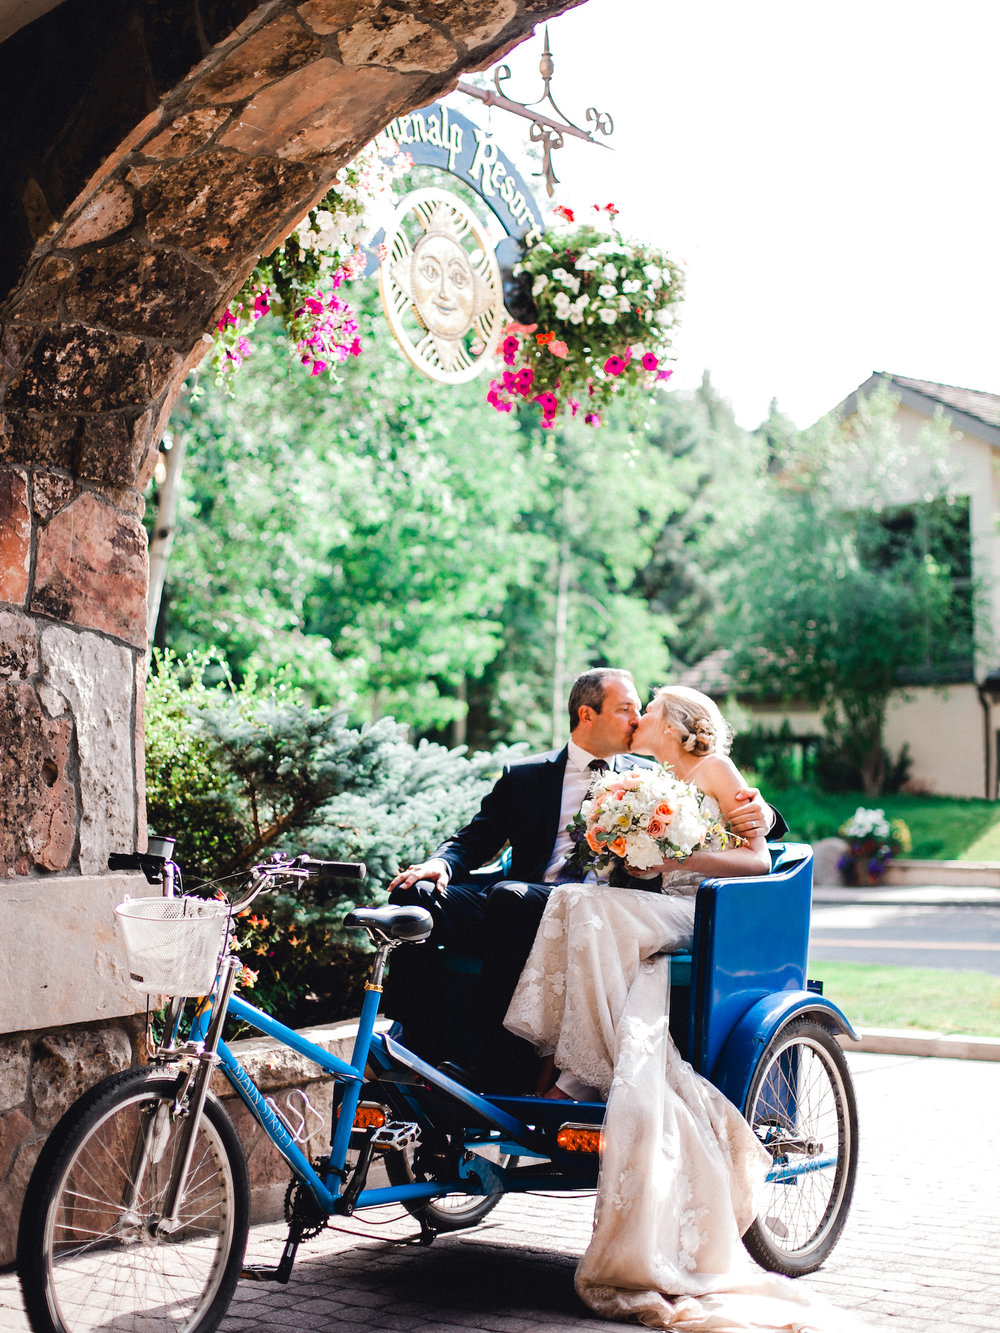 Bride and Groom arriving for their wedding reception at the Sonnenalp in a pedicab